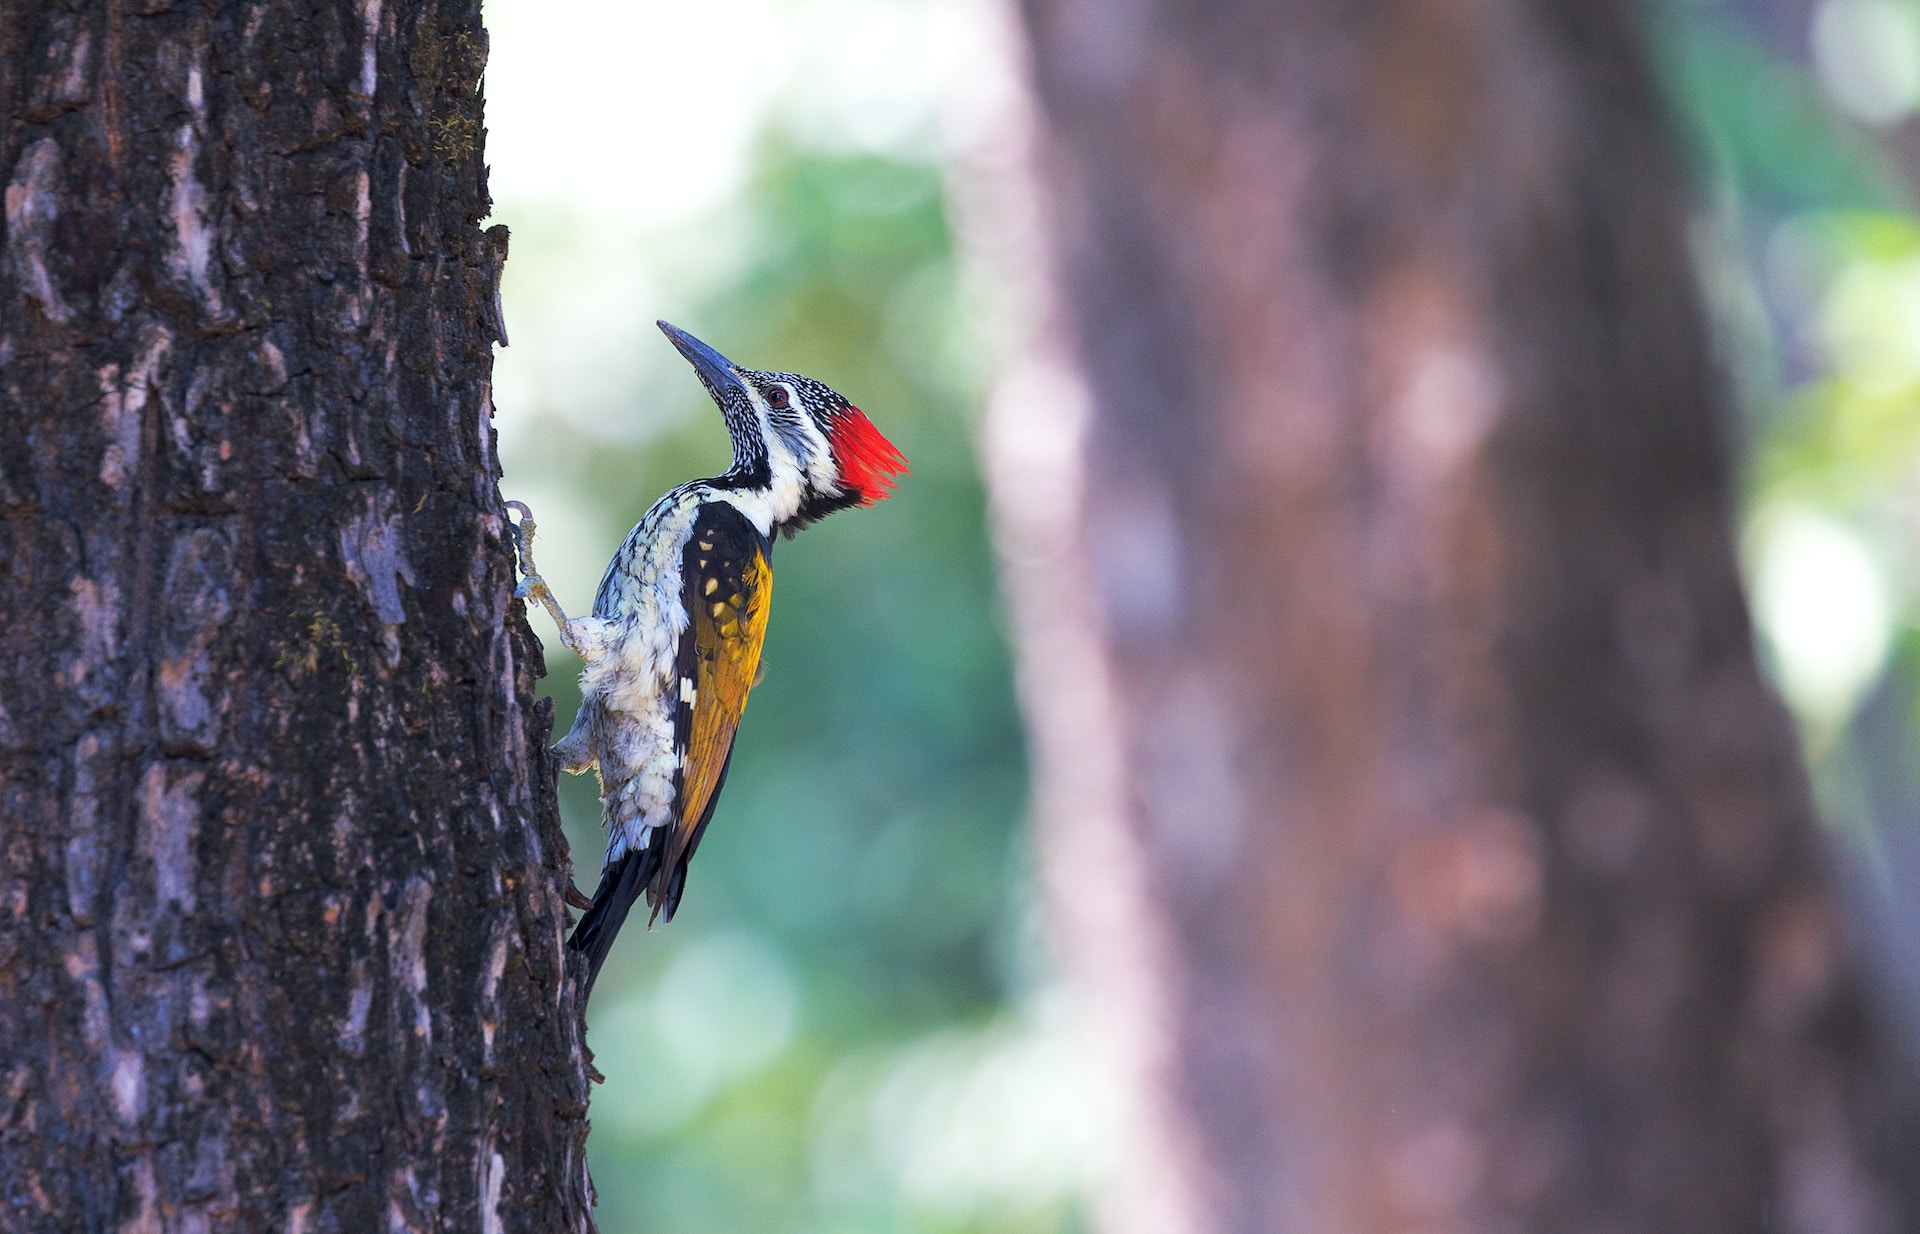 A woodpecker perched on a tree